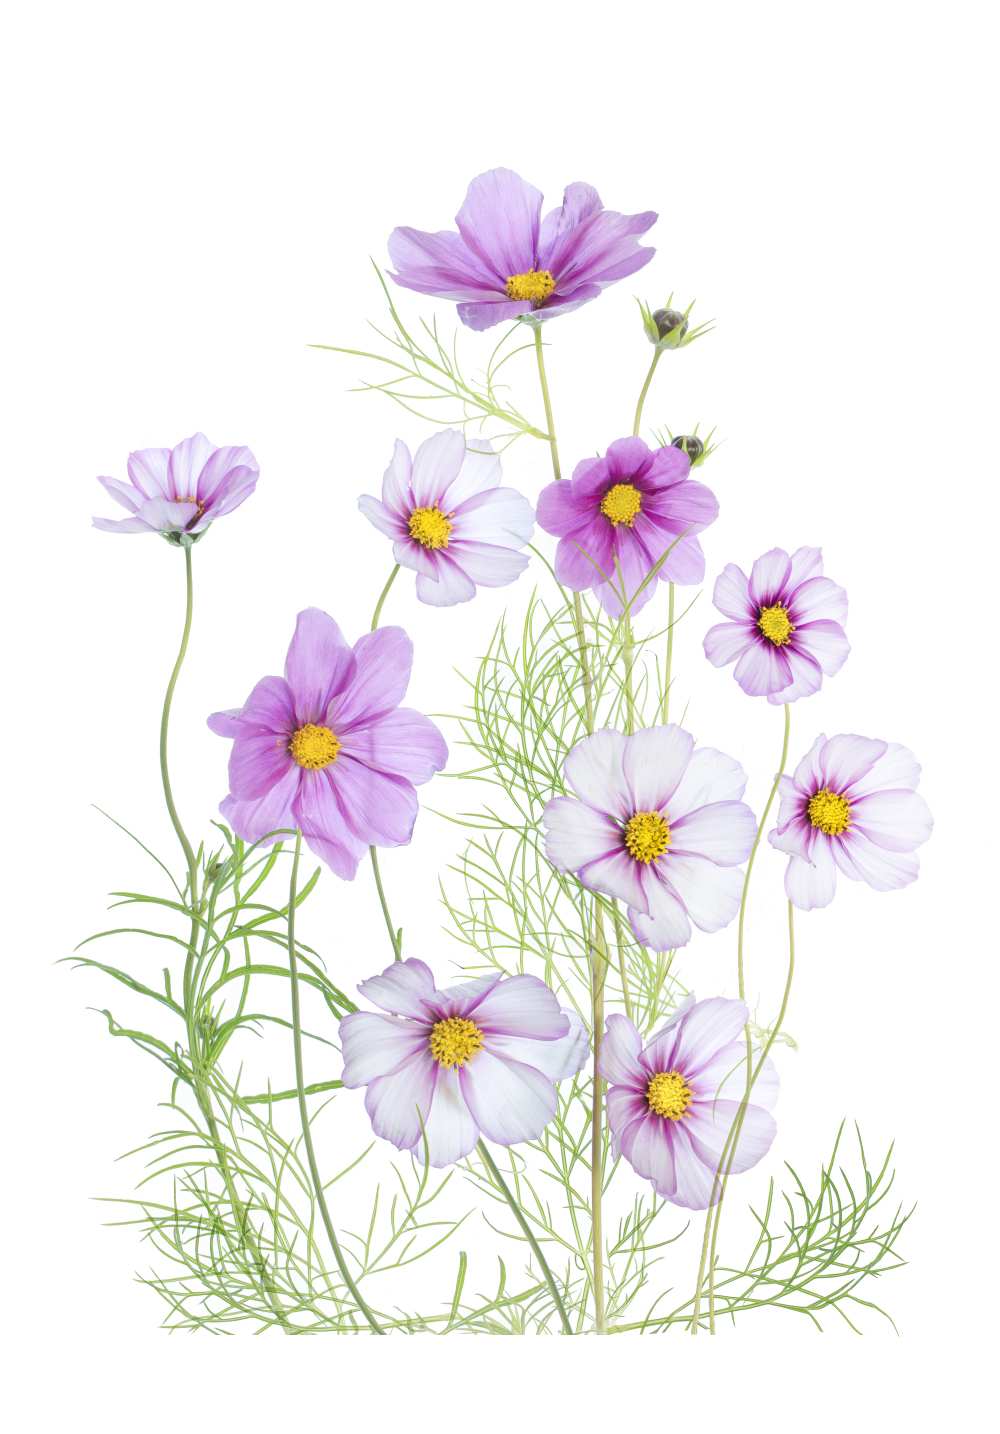 Cosmos Comfort a Mandy Disher